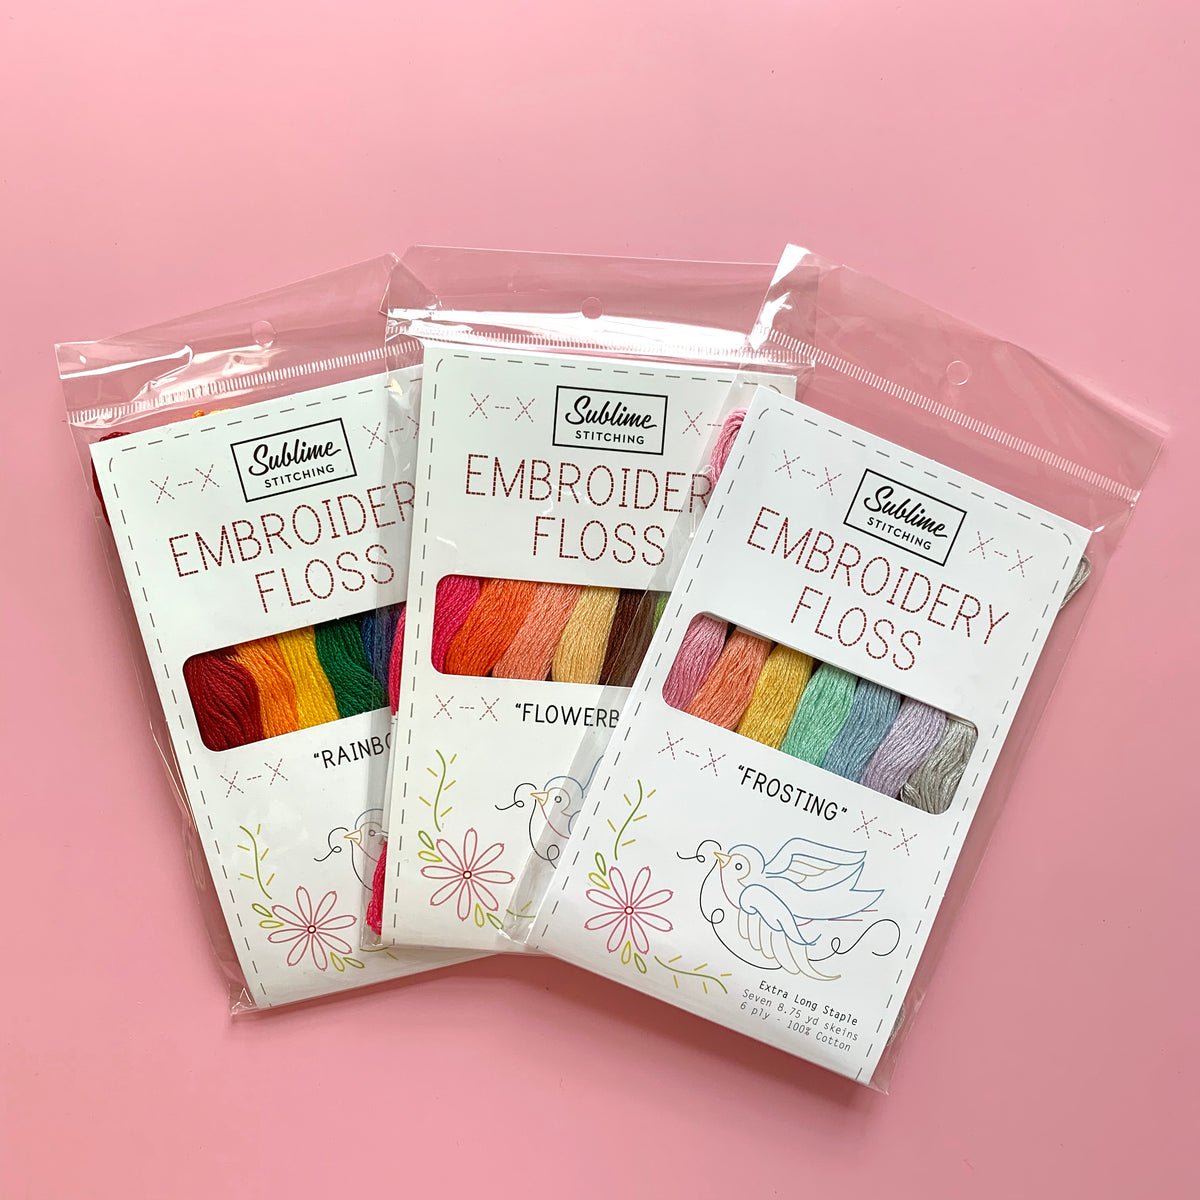 Sublime Stitching Embroidery Floss Set, Frosting Palette - Seven 8.75 yard  skeins